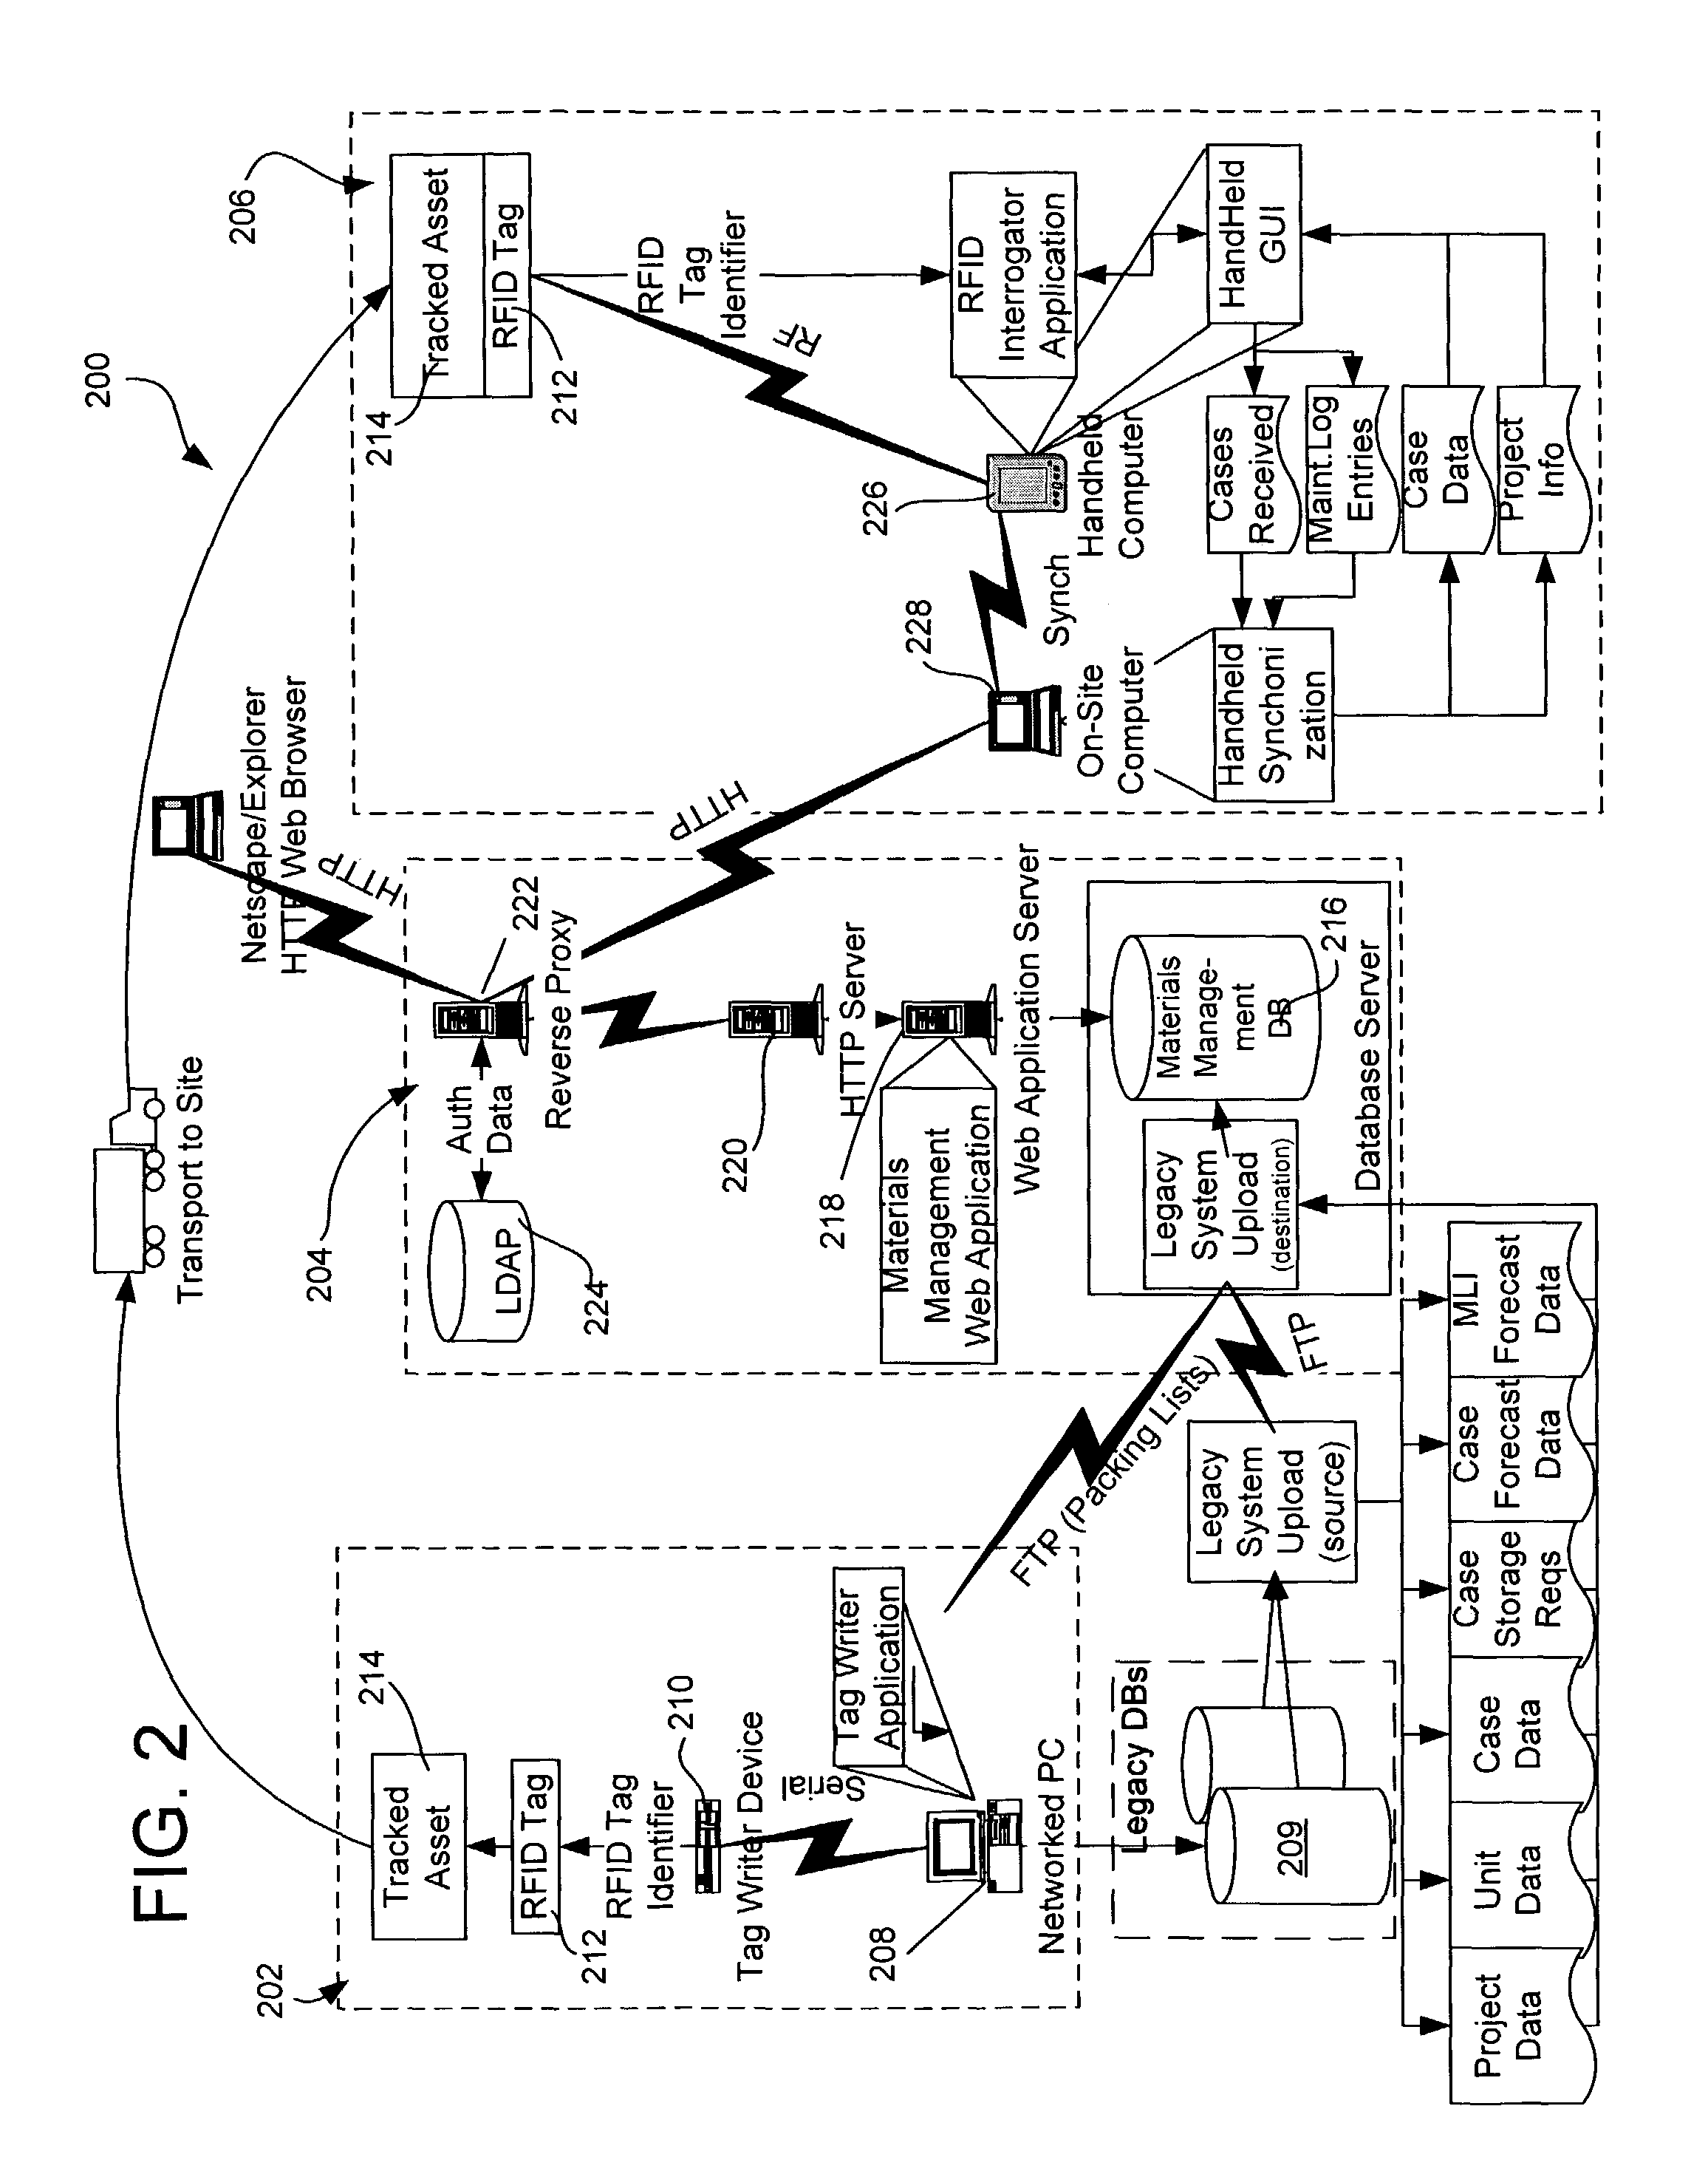 System and method for providing asset management and tracking capabilities